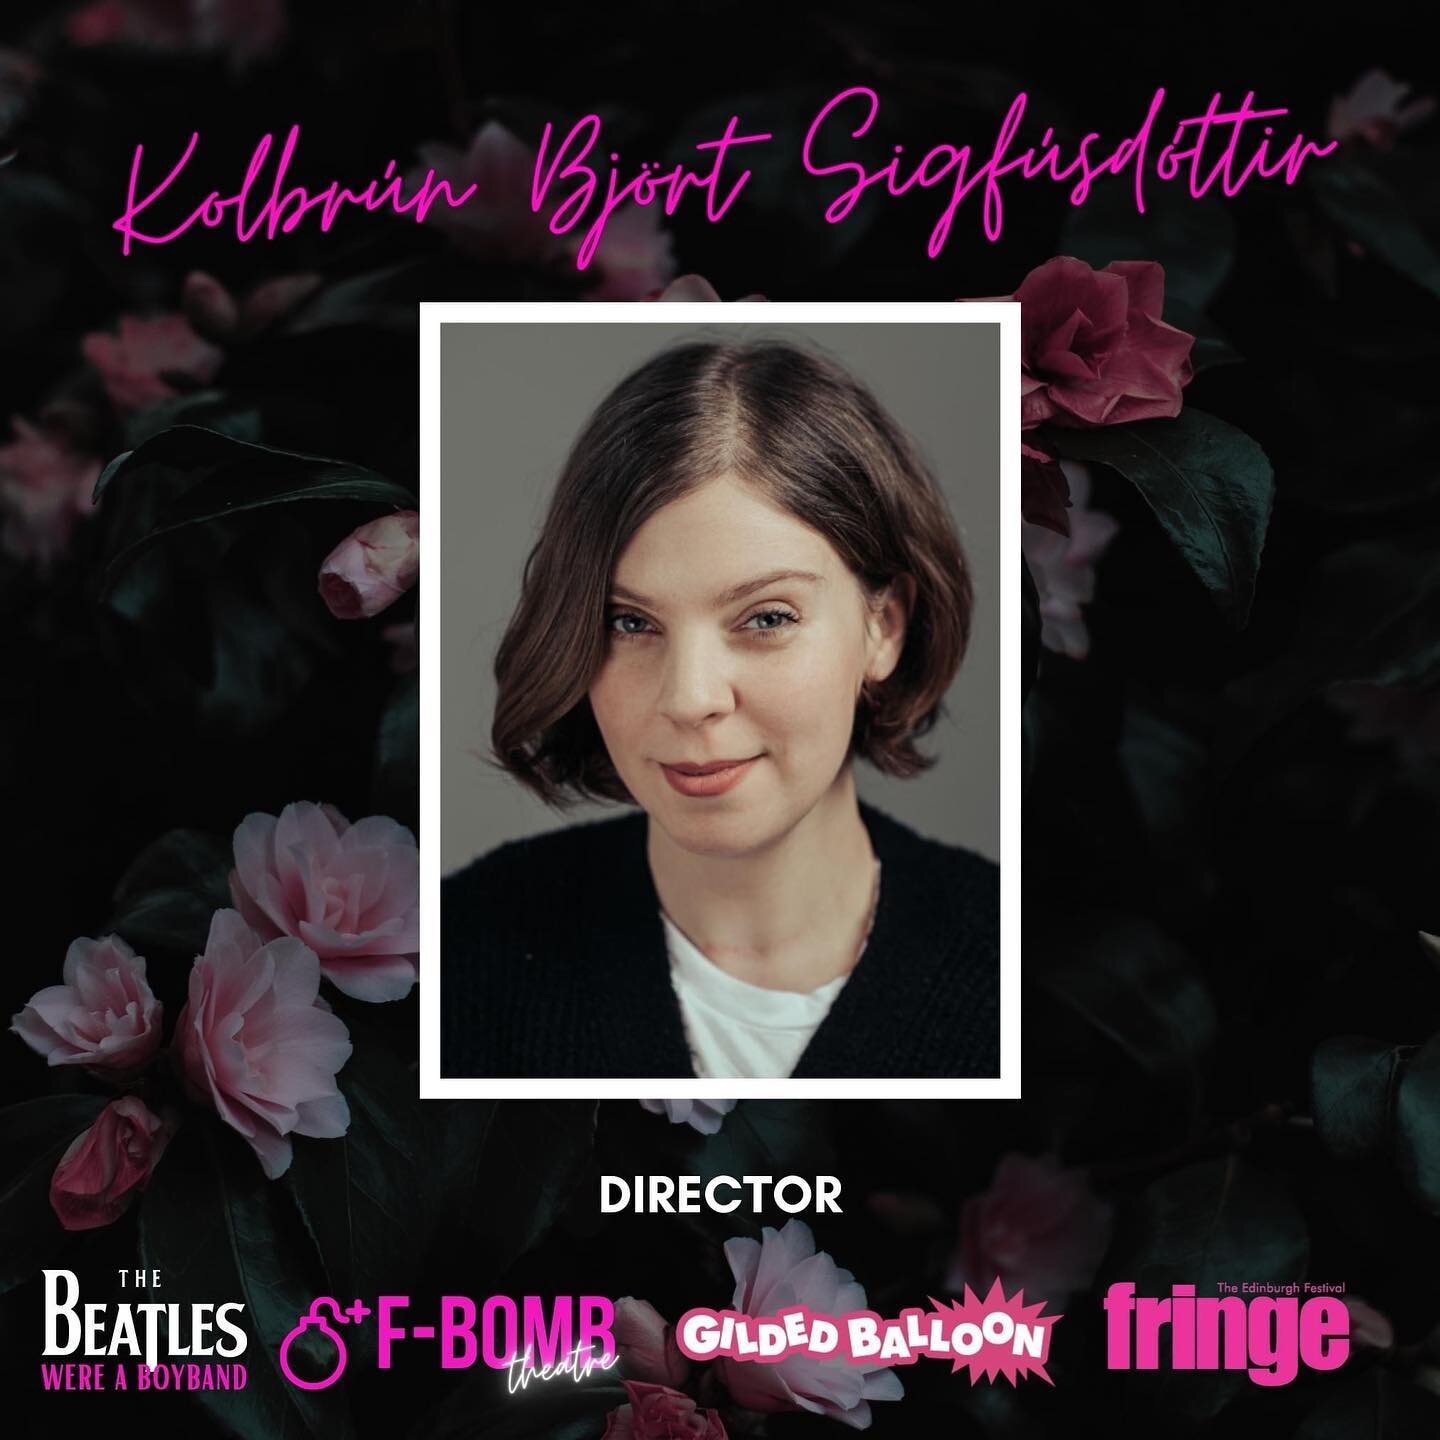 We are beyond excited to announce the director of our upcoming #edfringe production, THE BEATLES WERE A BOYBAND. 

Kolbr&uacute;n Bj&ouml;rt Sigf&uacute;sd&oacute;ttir @kolbrunbjort is a director, dramaturg and playwright from Iceland with a keen int